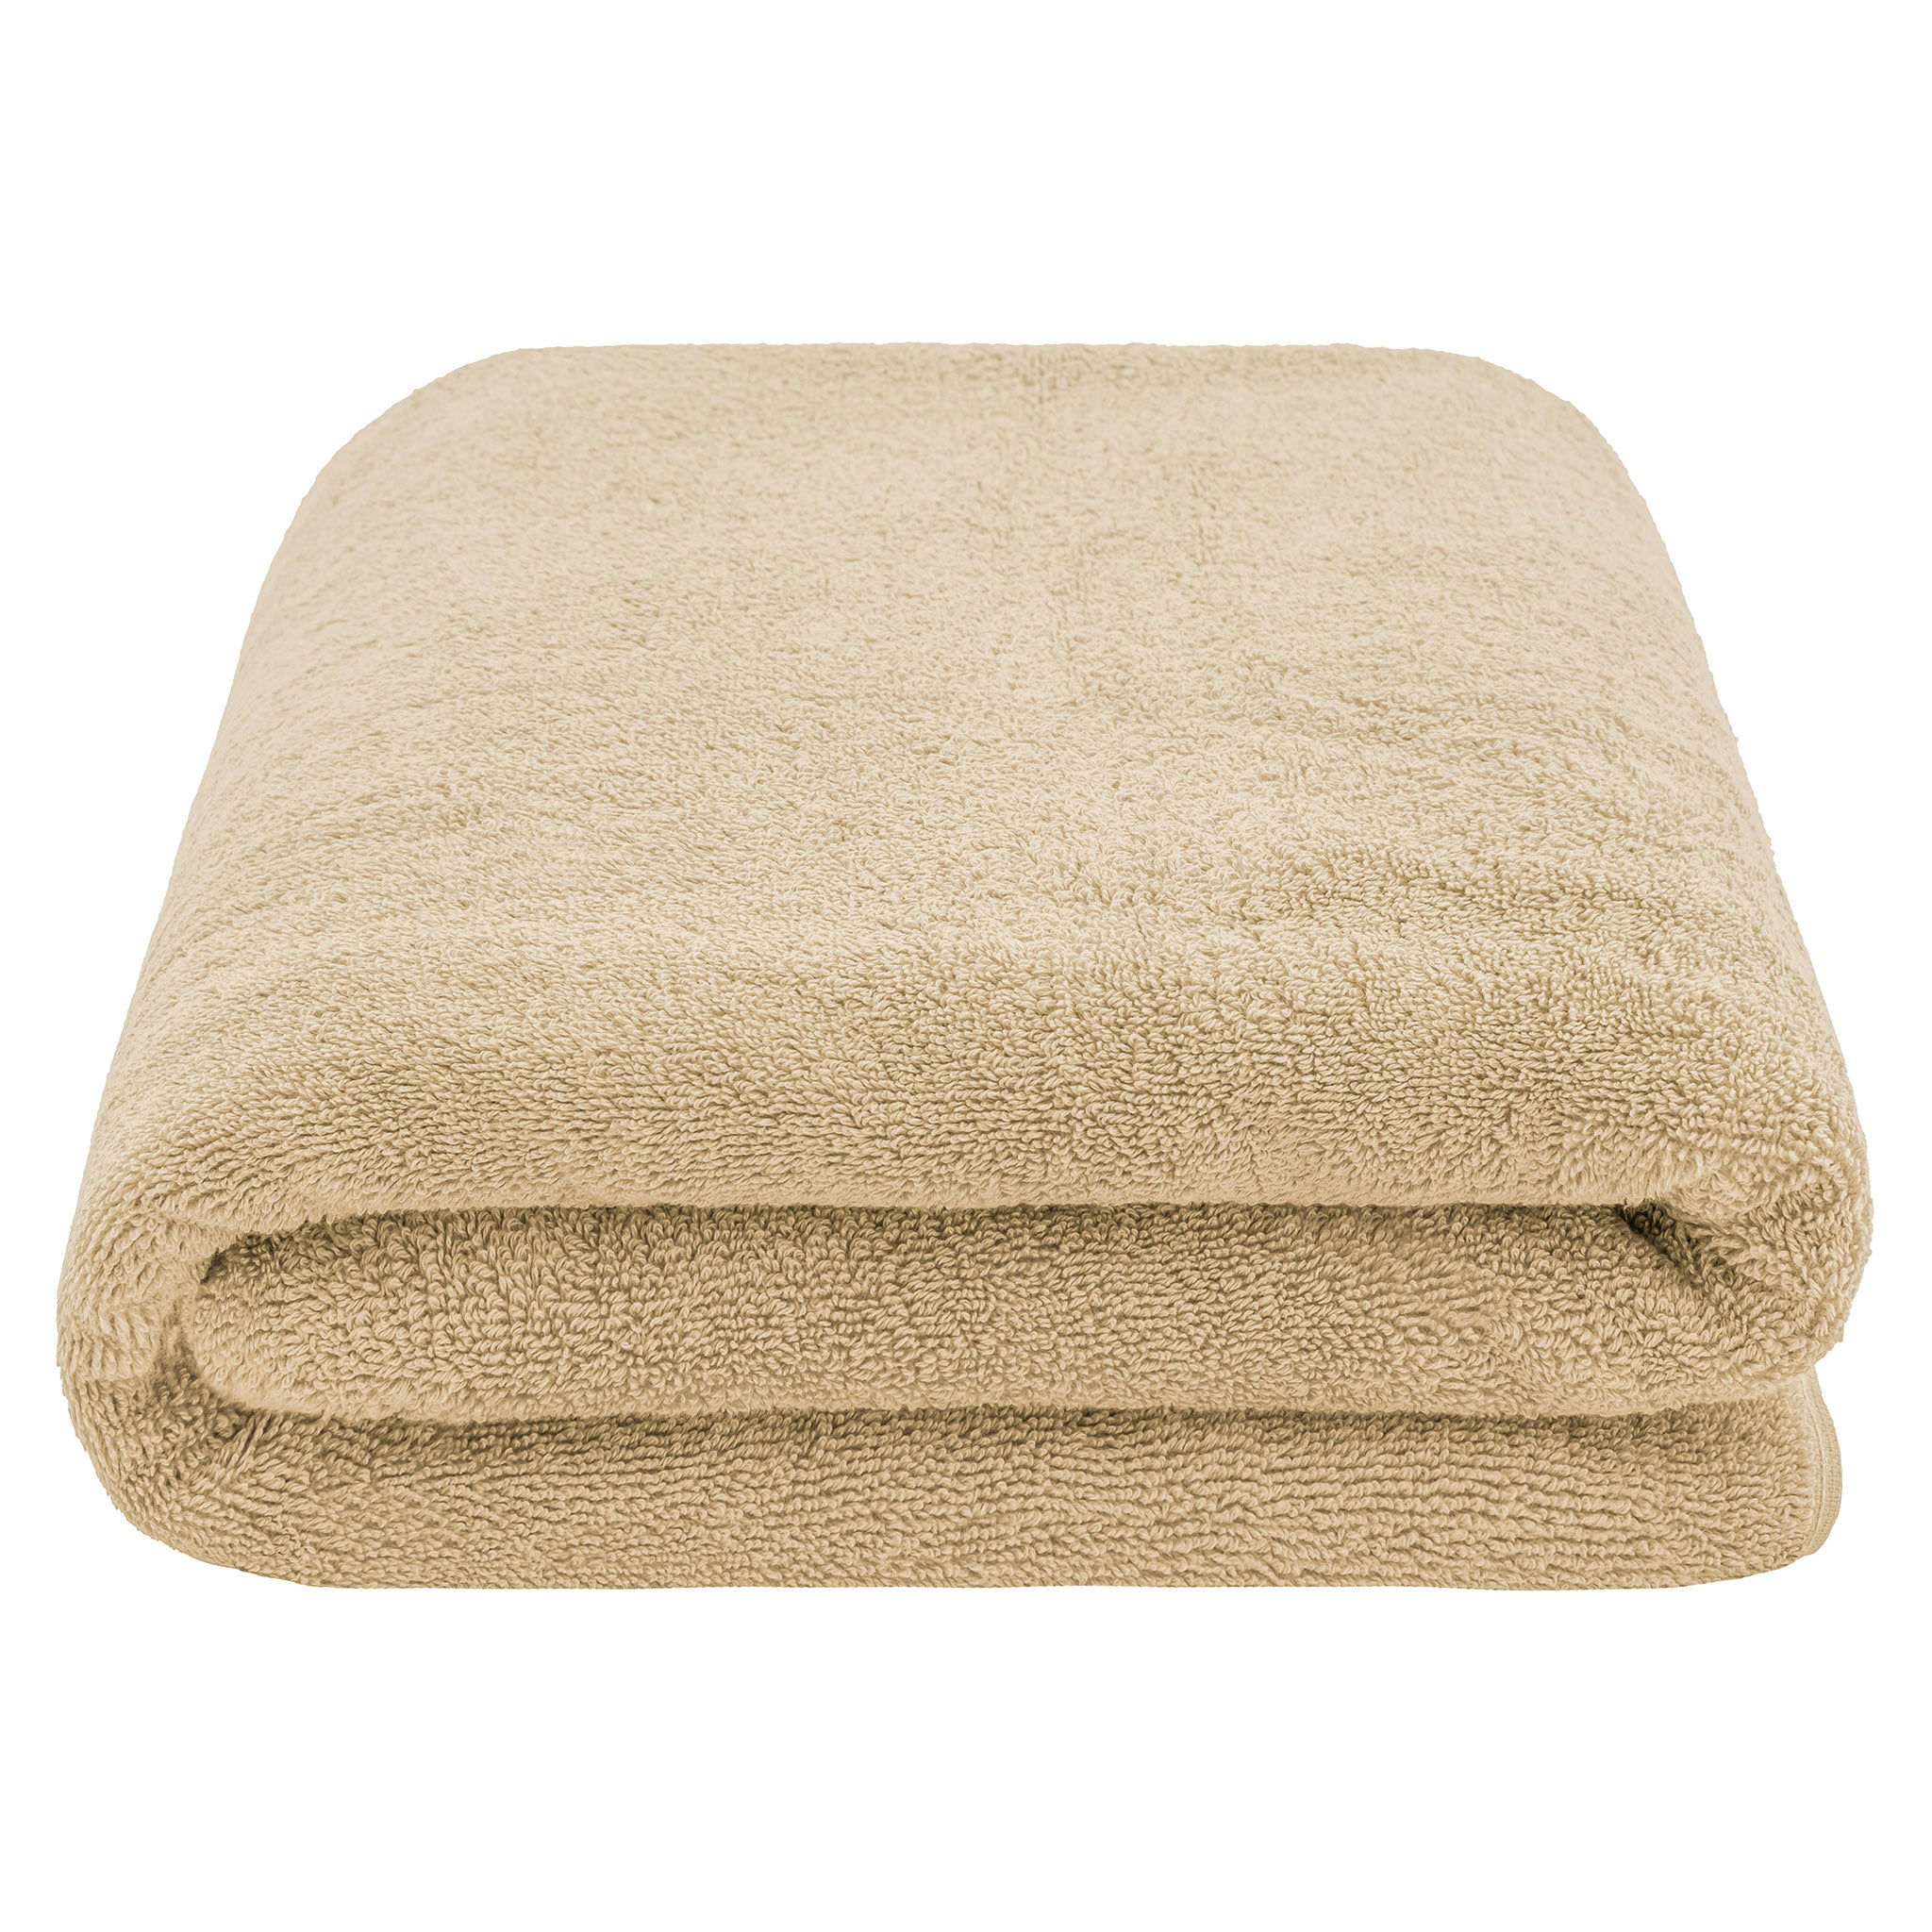 American Soft Linen 100% Ring Spun Cotton 40x80 Inches Oversized Bath Sheets sand-taupe-3